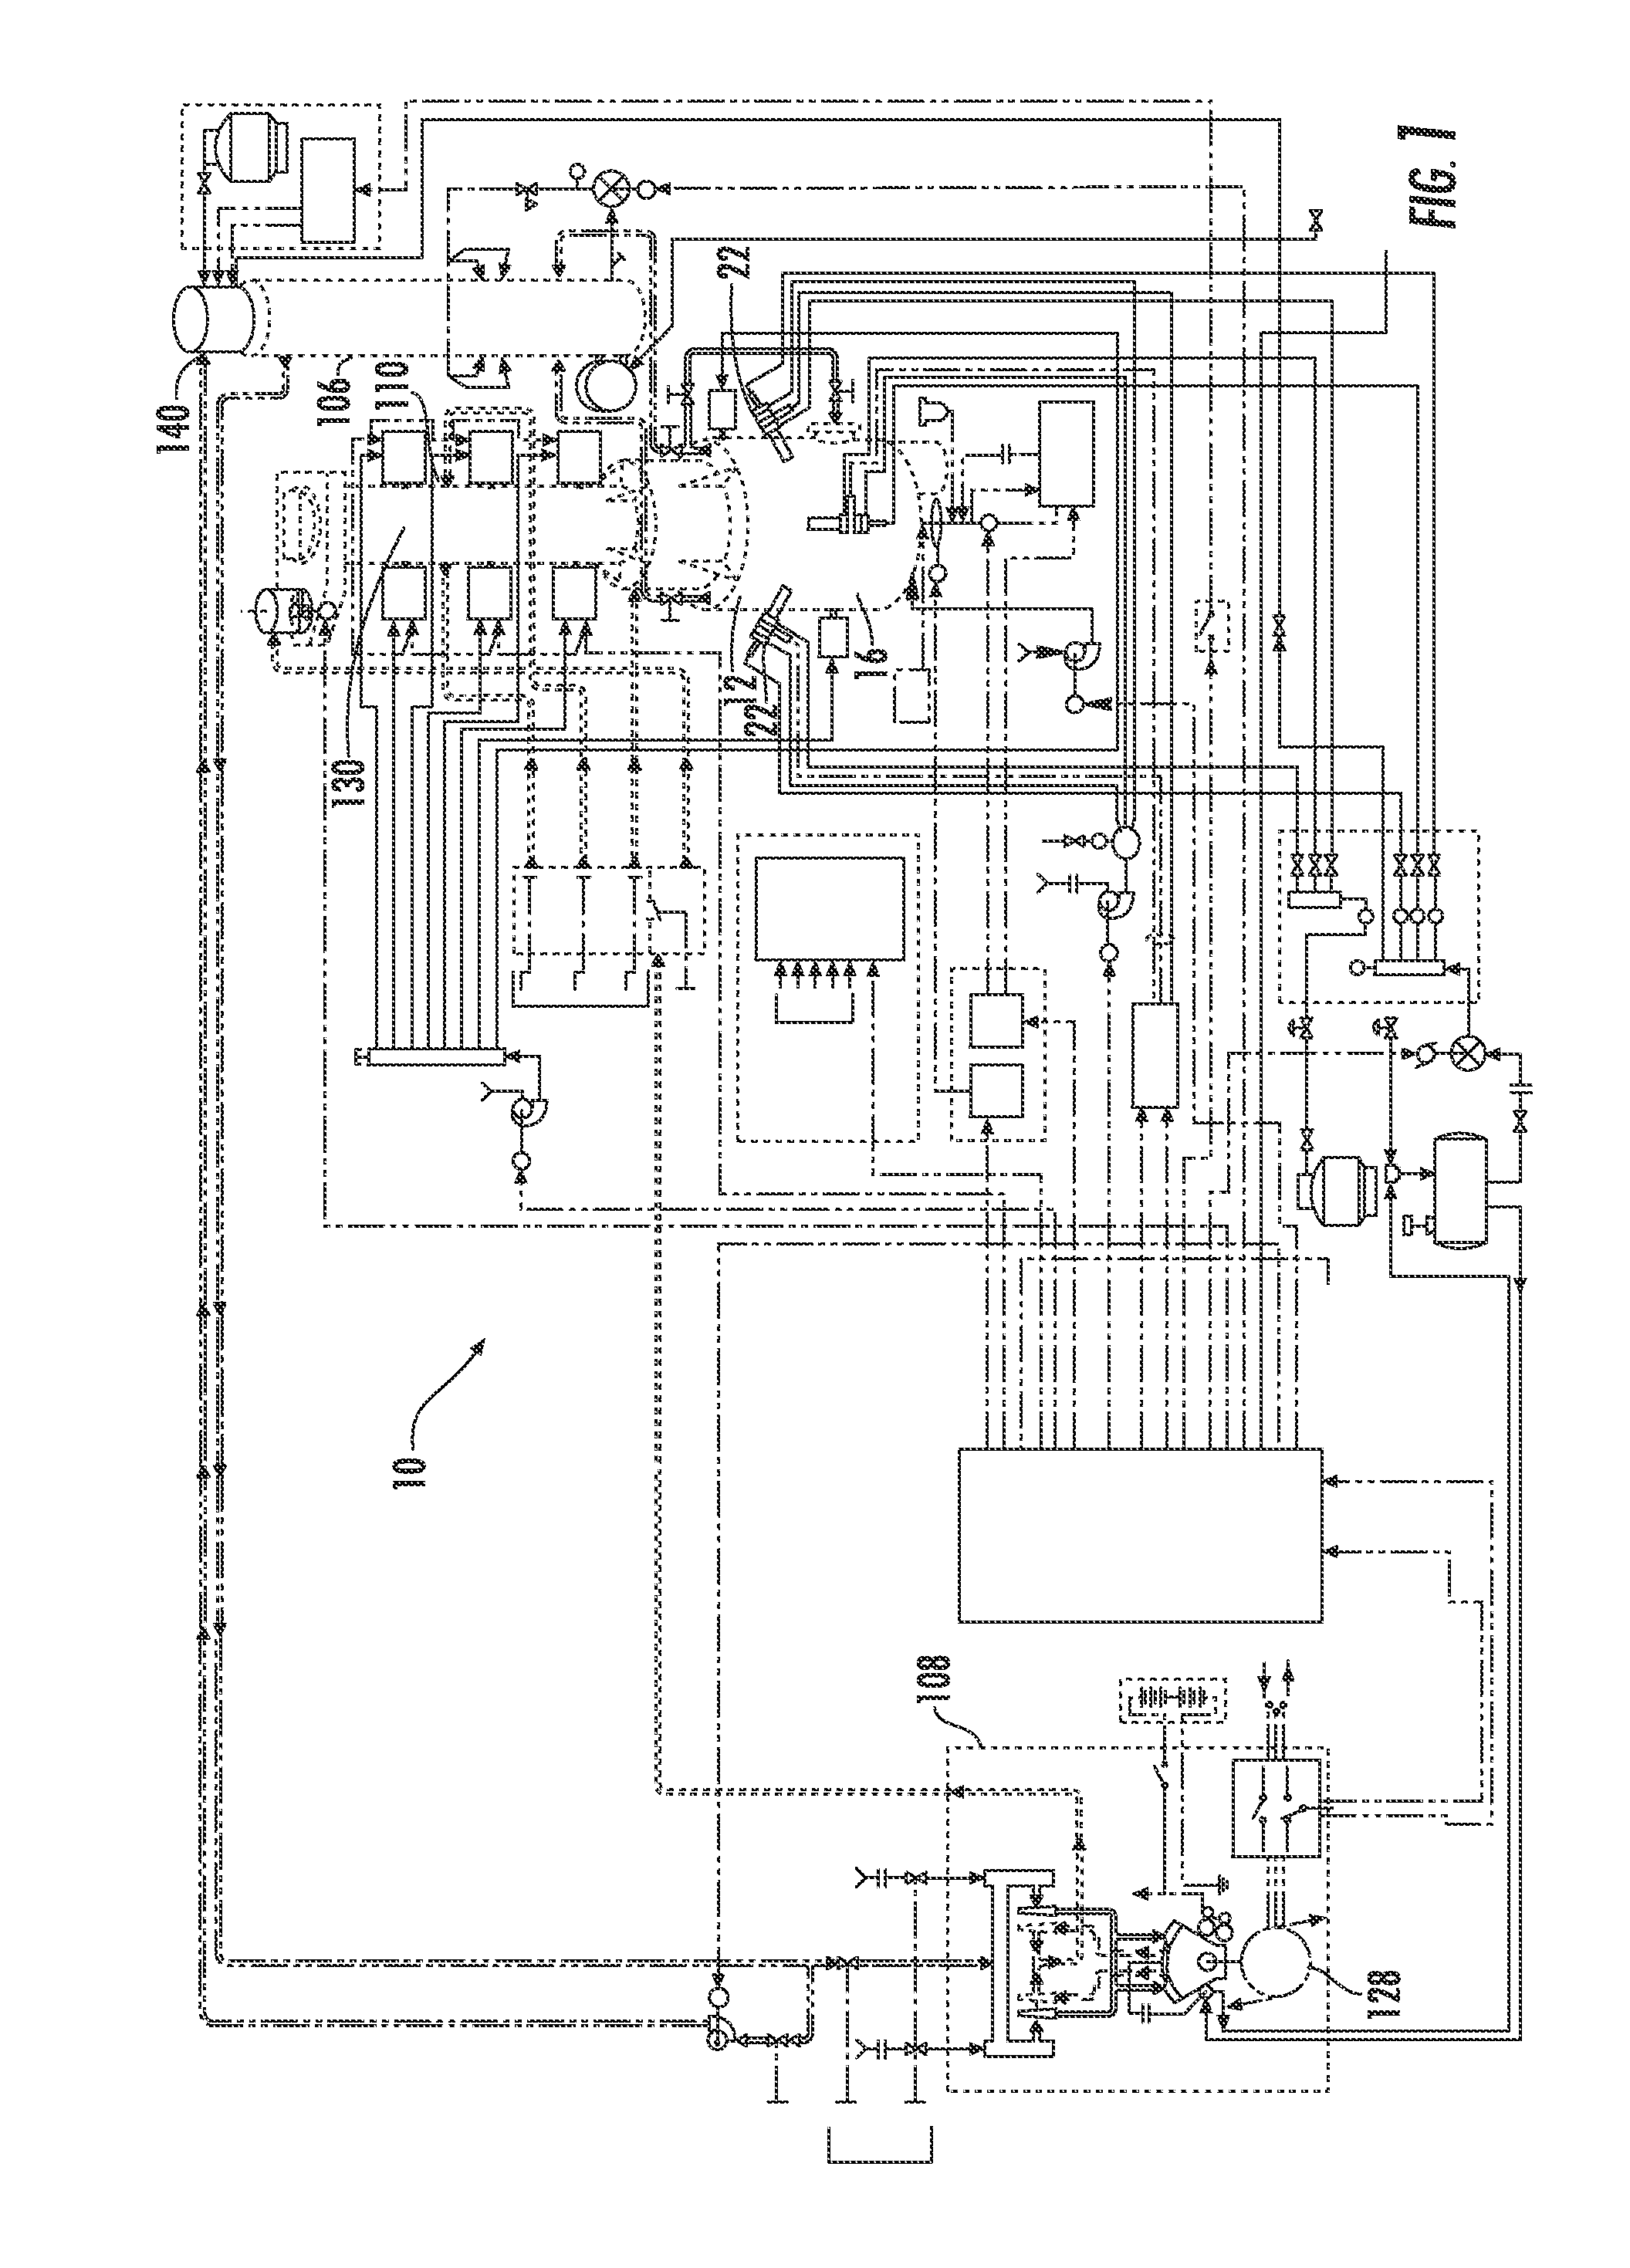 Plasma assisted gasification system with agitator drive assembly in reactor vessel